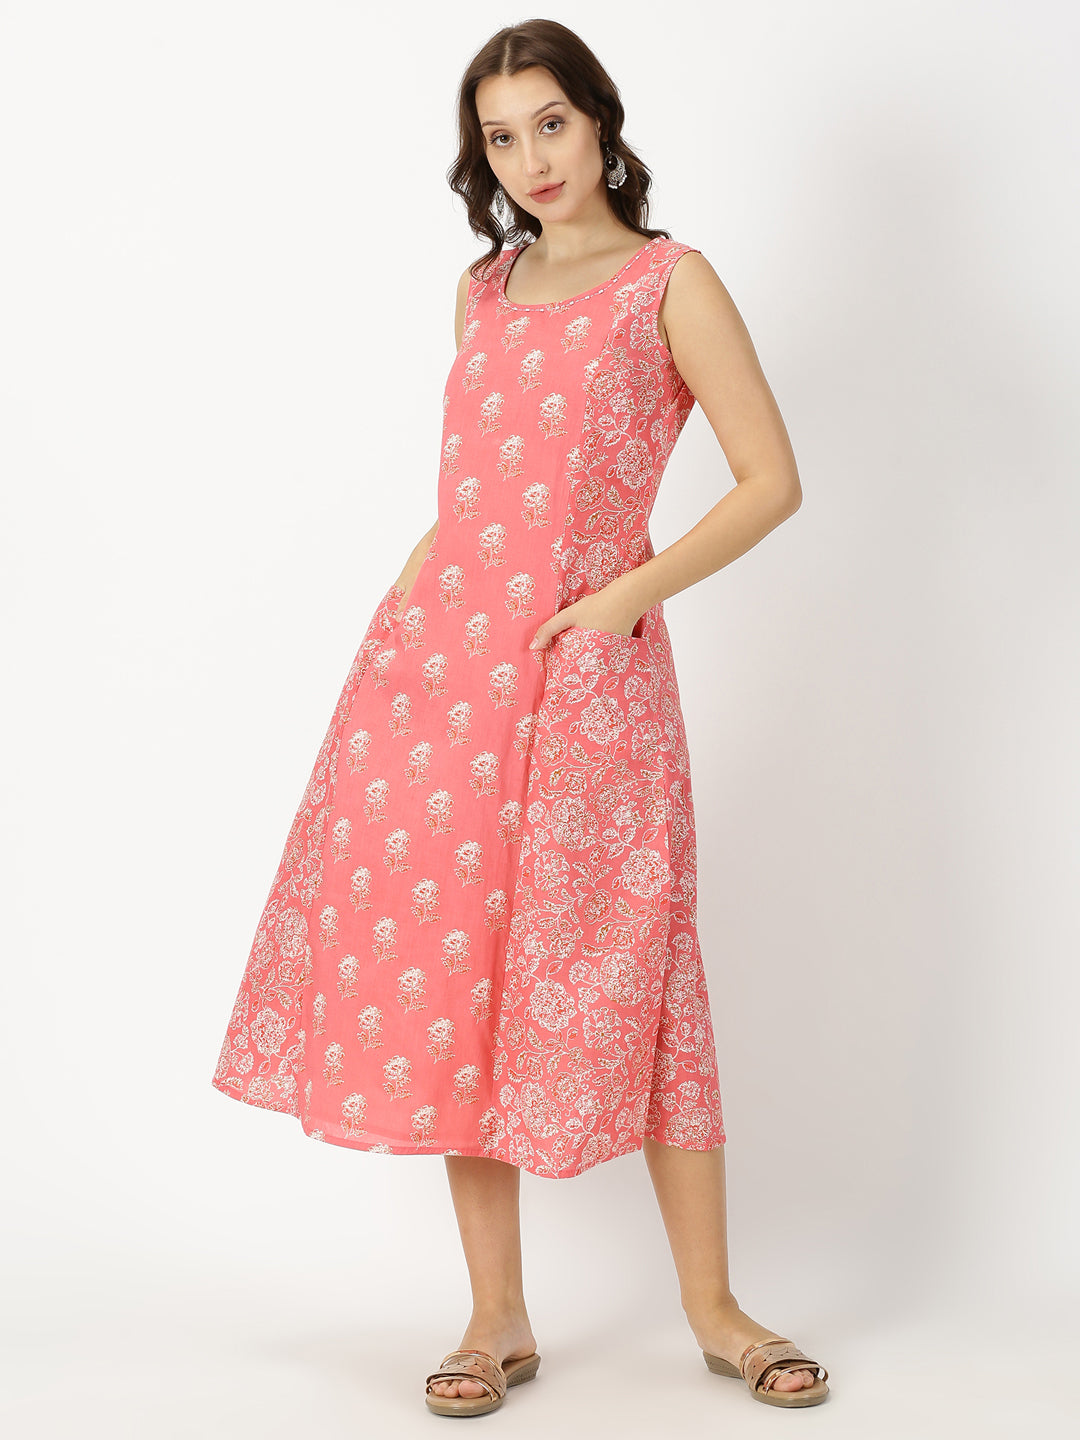 Cotton Midi Dress For Ladies Manufacturer Supplier from Jaipur India